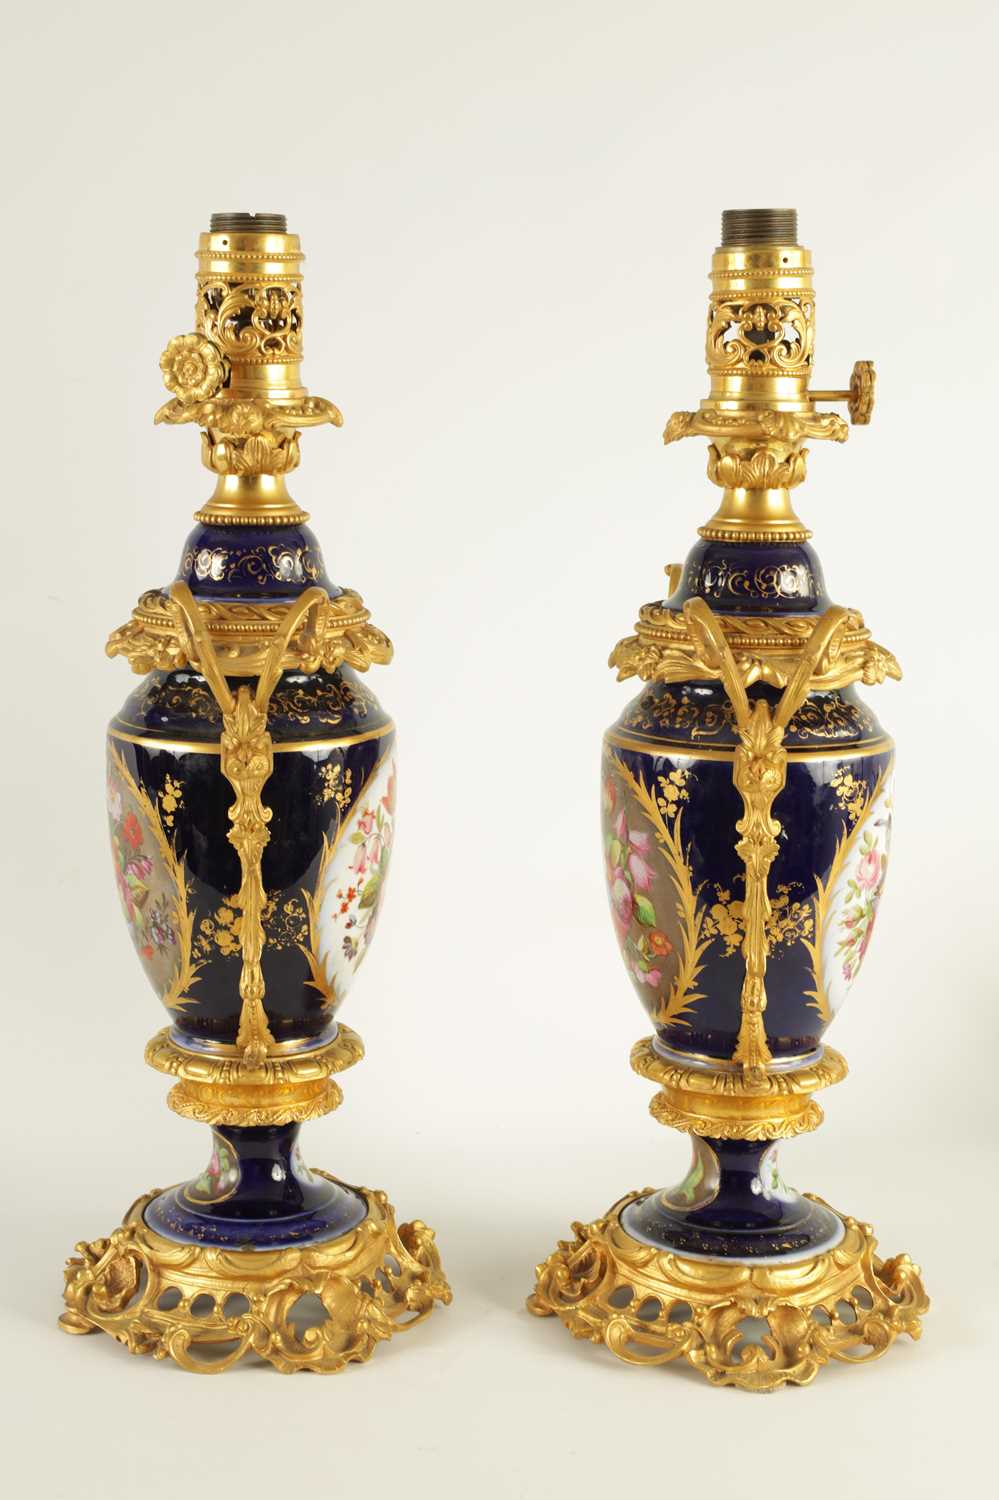 A PAIR OF 19TH CENTURY CONTINENTAL ORMOLU MOUNTED PORCELAIN LAMP BASES - Image 13 of 13